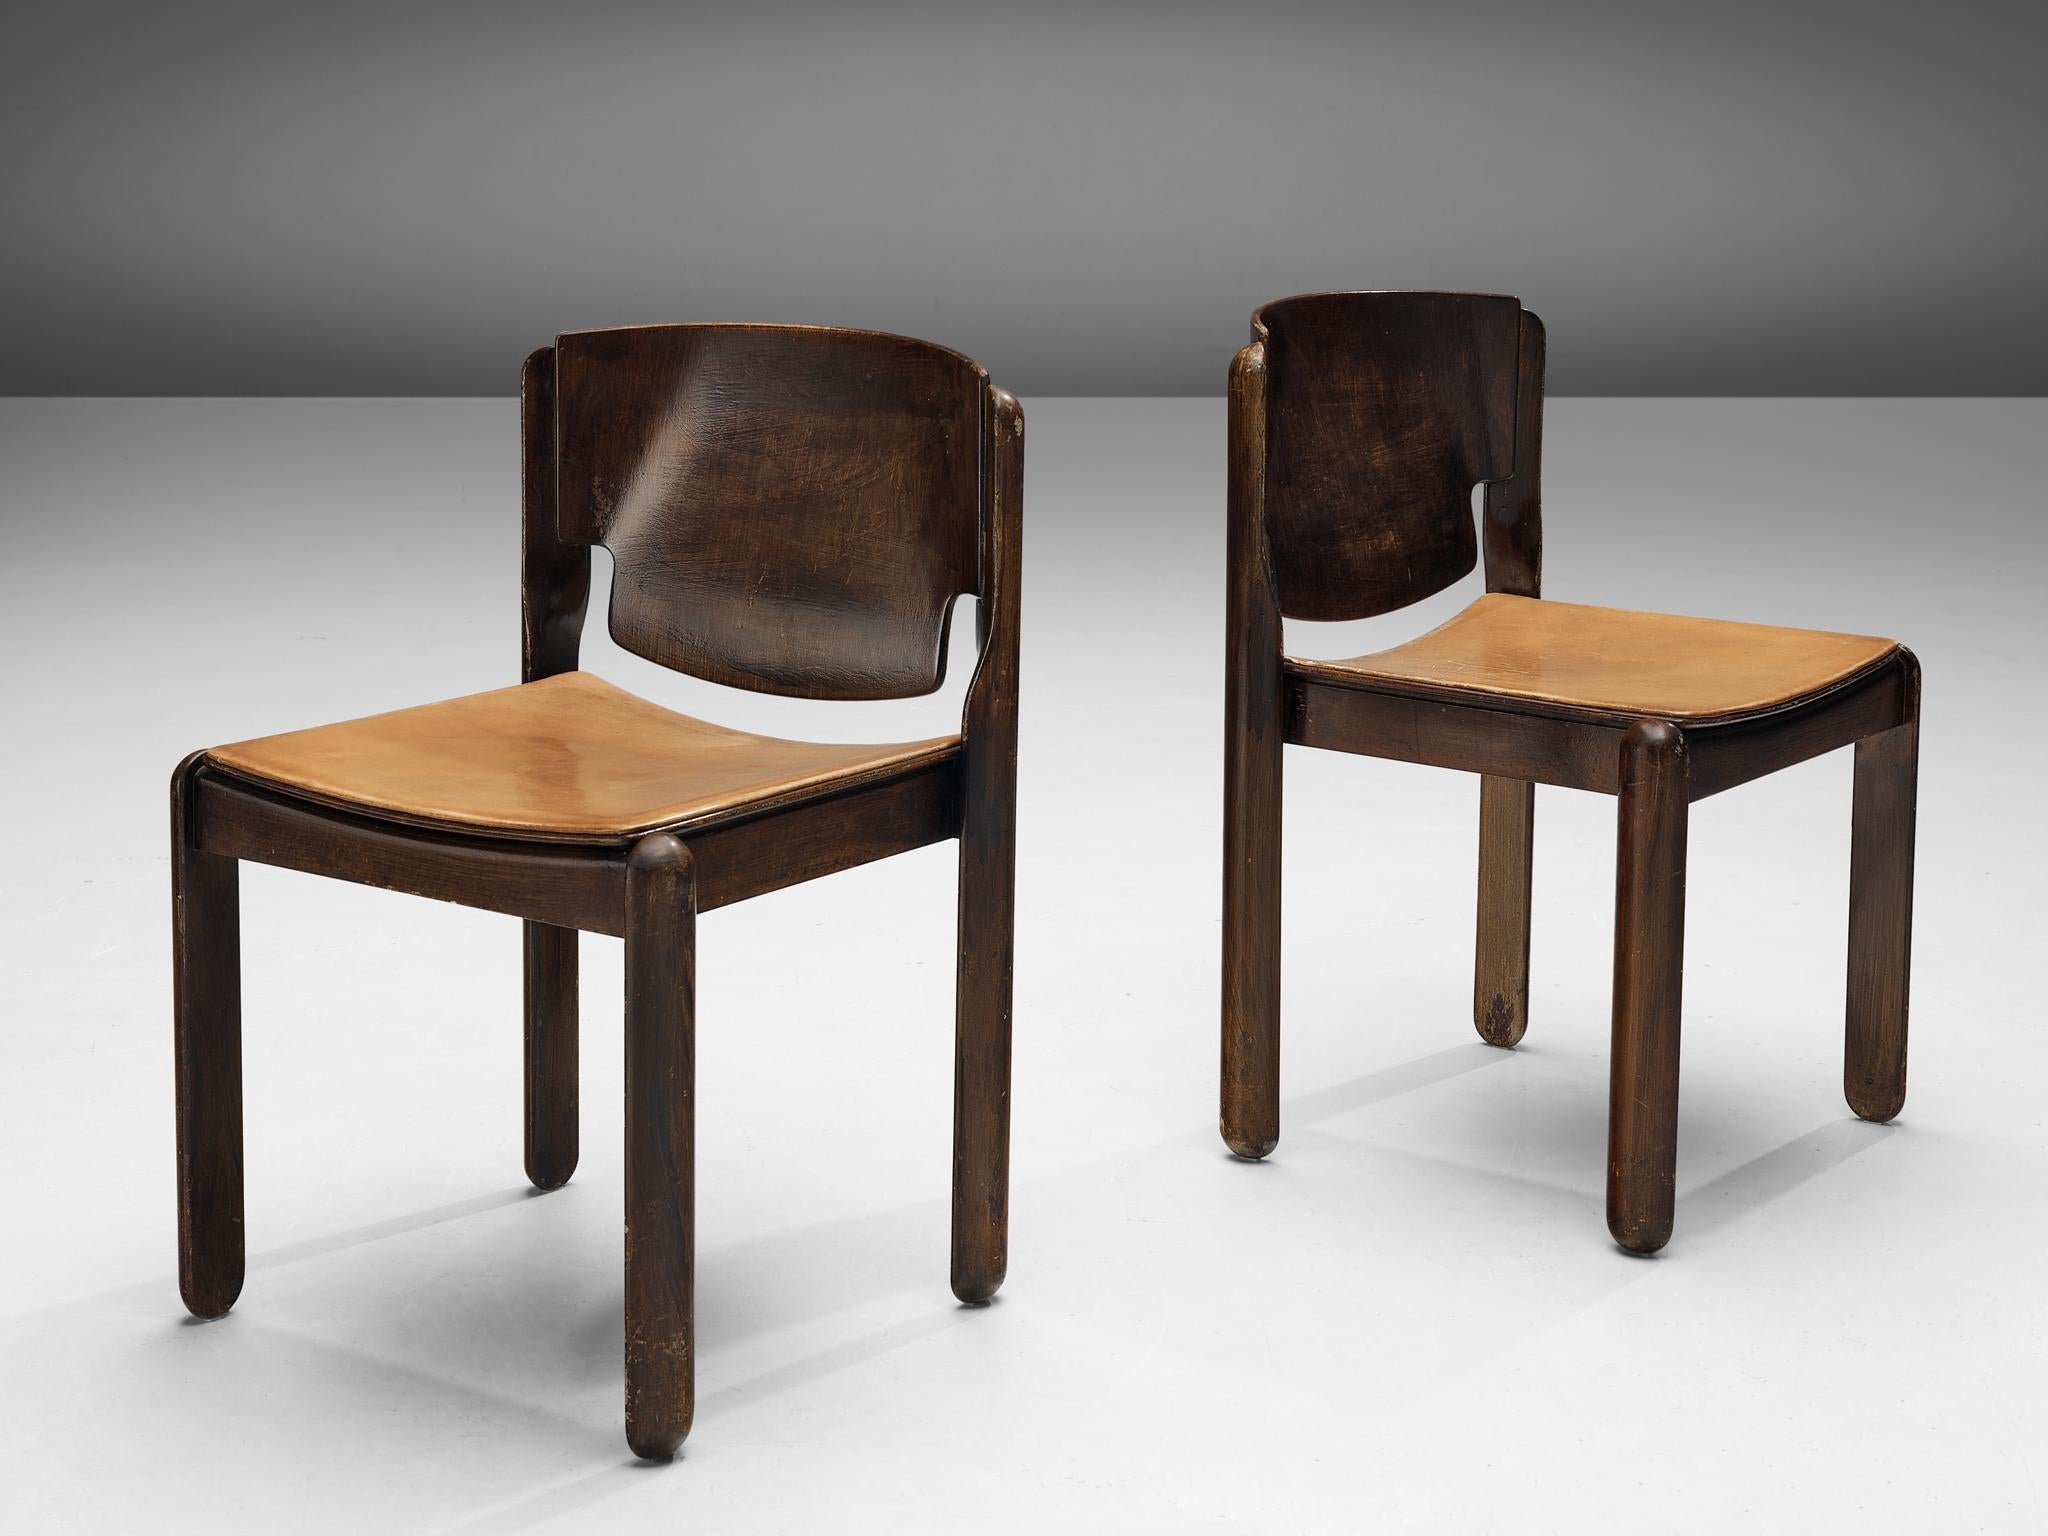 Italian Vico Magistretti for Cassina Chairs with Cognac Leather